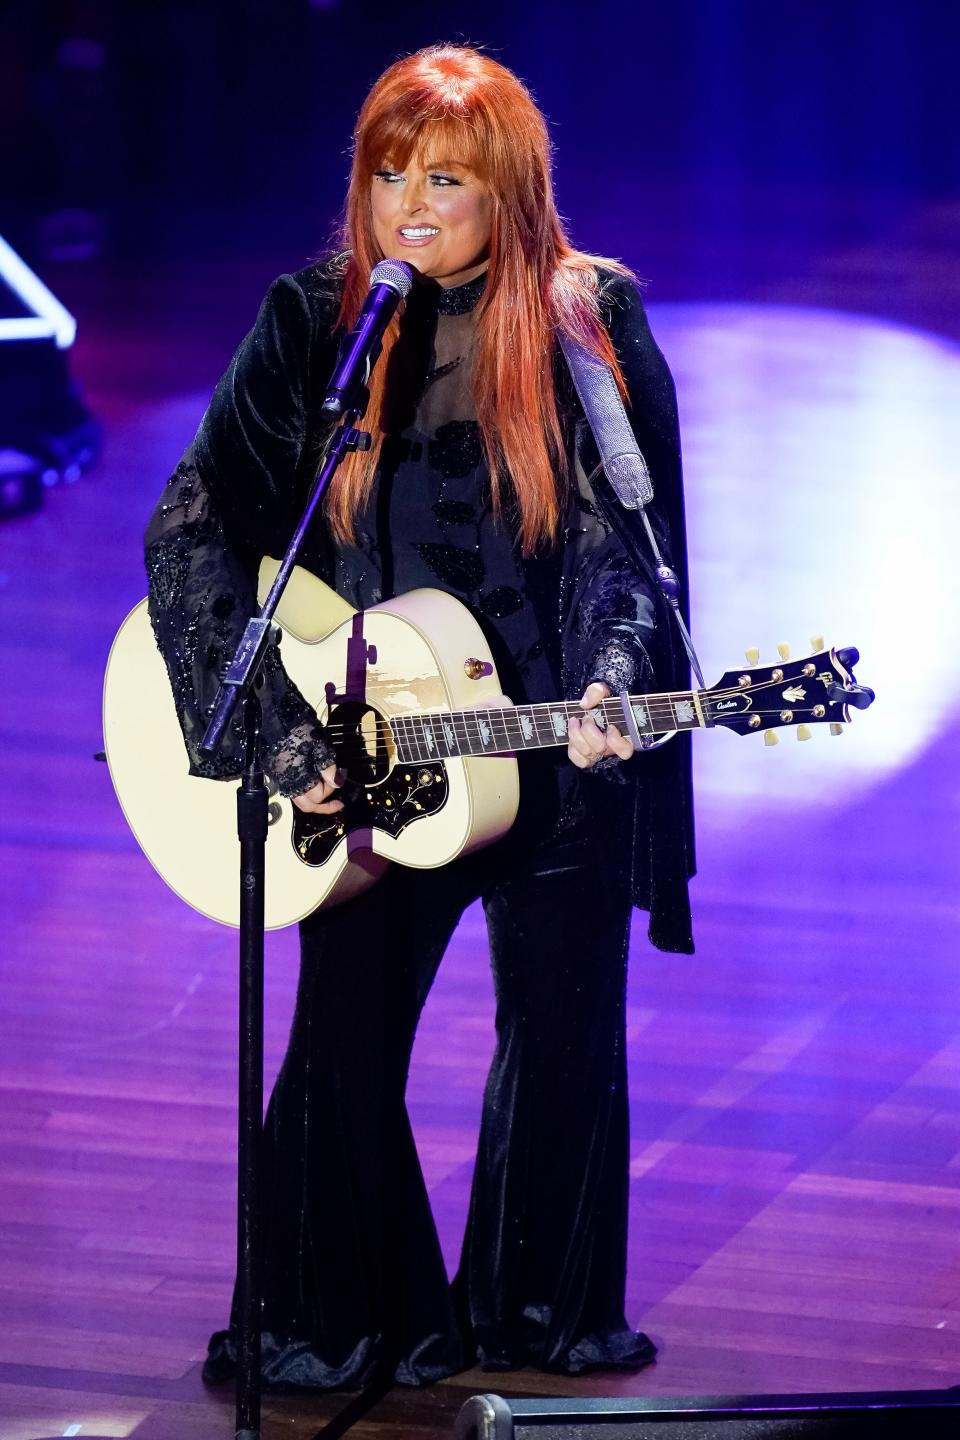 -Wynonna Judd will appear with Ashley McBryde at the 2023 CMT Music Awards